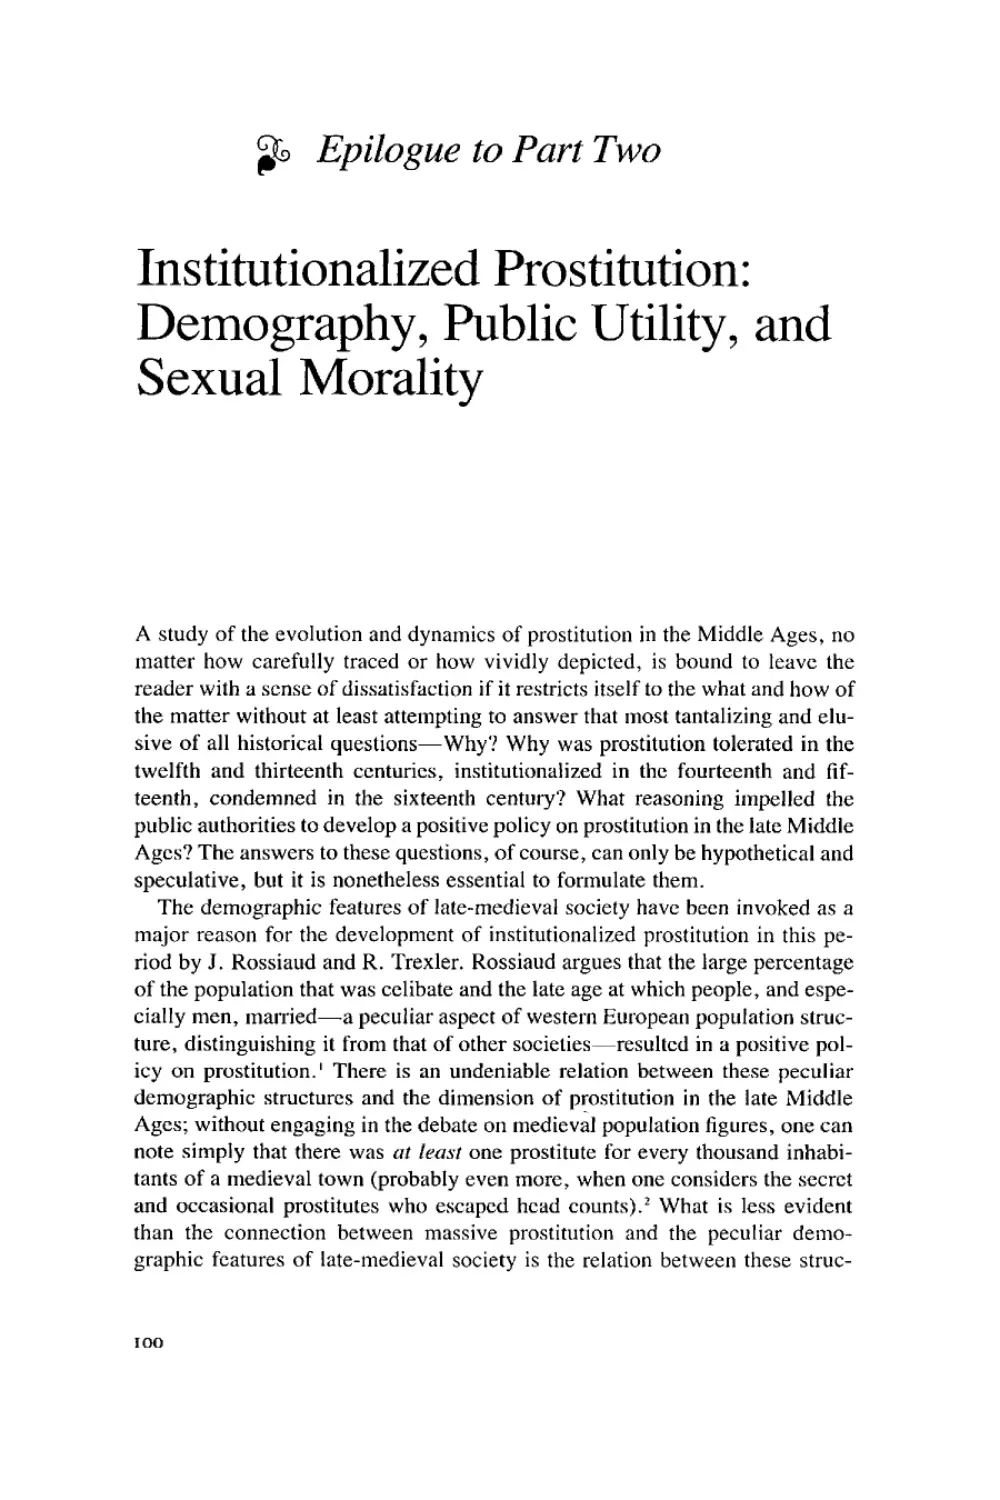 Epilogue to Part Two: Institutionalized Prostitution: Demography, Public Utility, and Sexual Morality